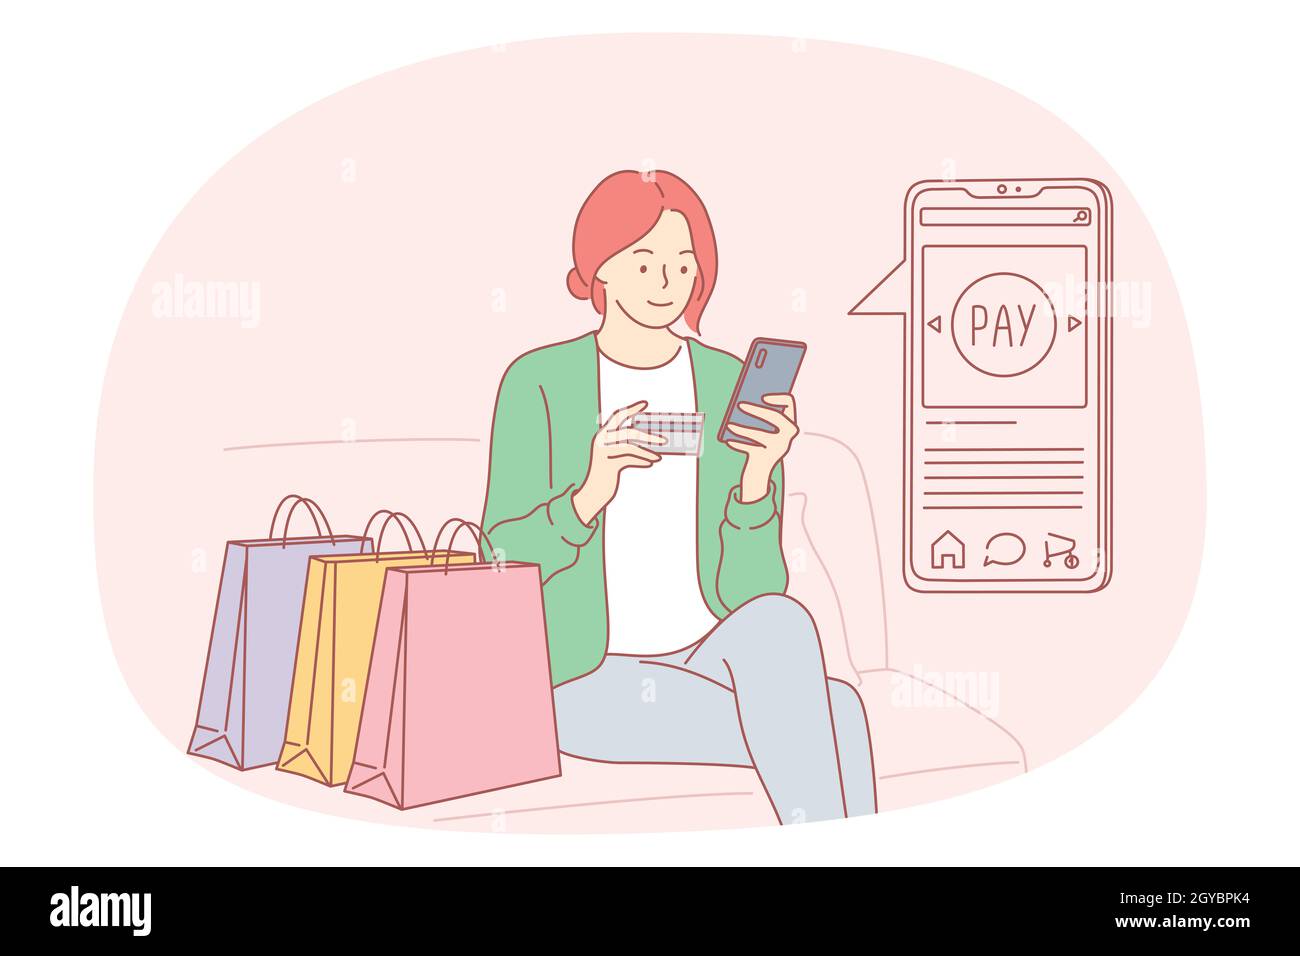 Online payment, electronic transaction, online order concept. Smiling woman sitting with shopping bags, smartphone and card and paying with contactles Stock Photo